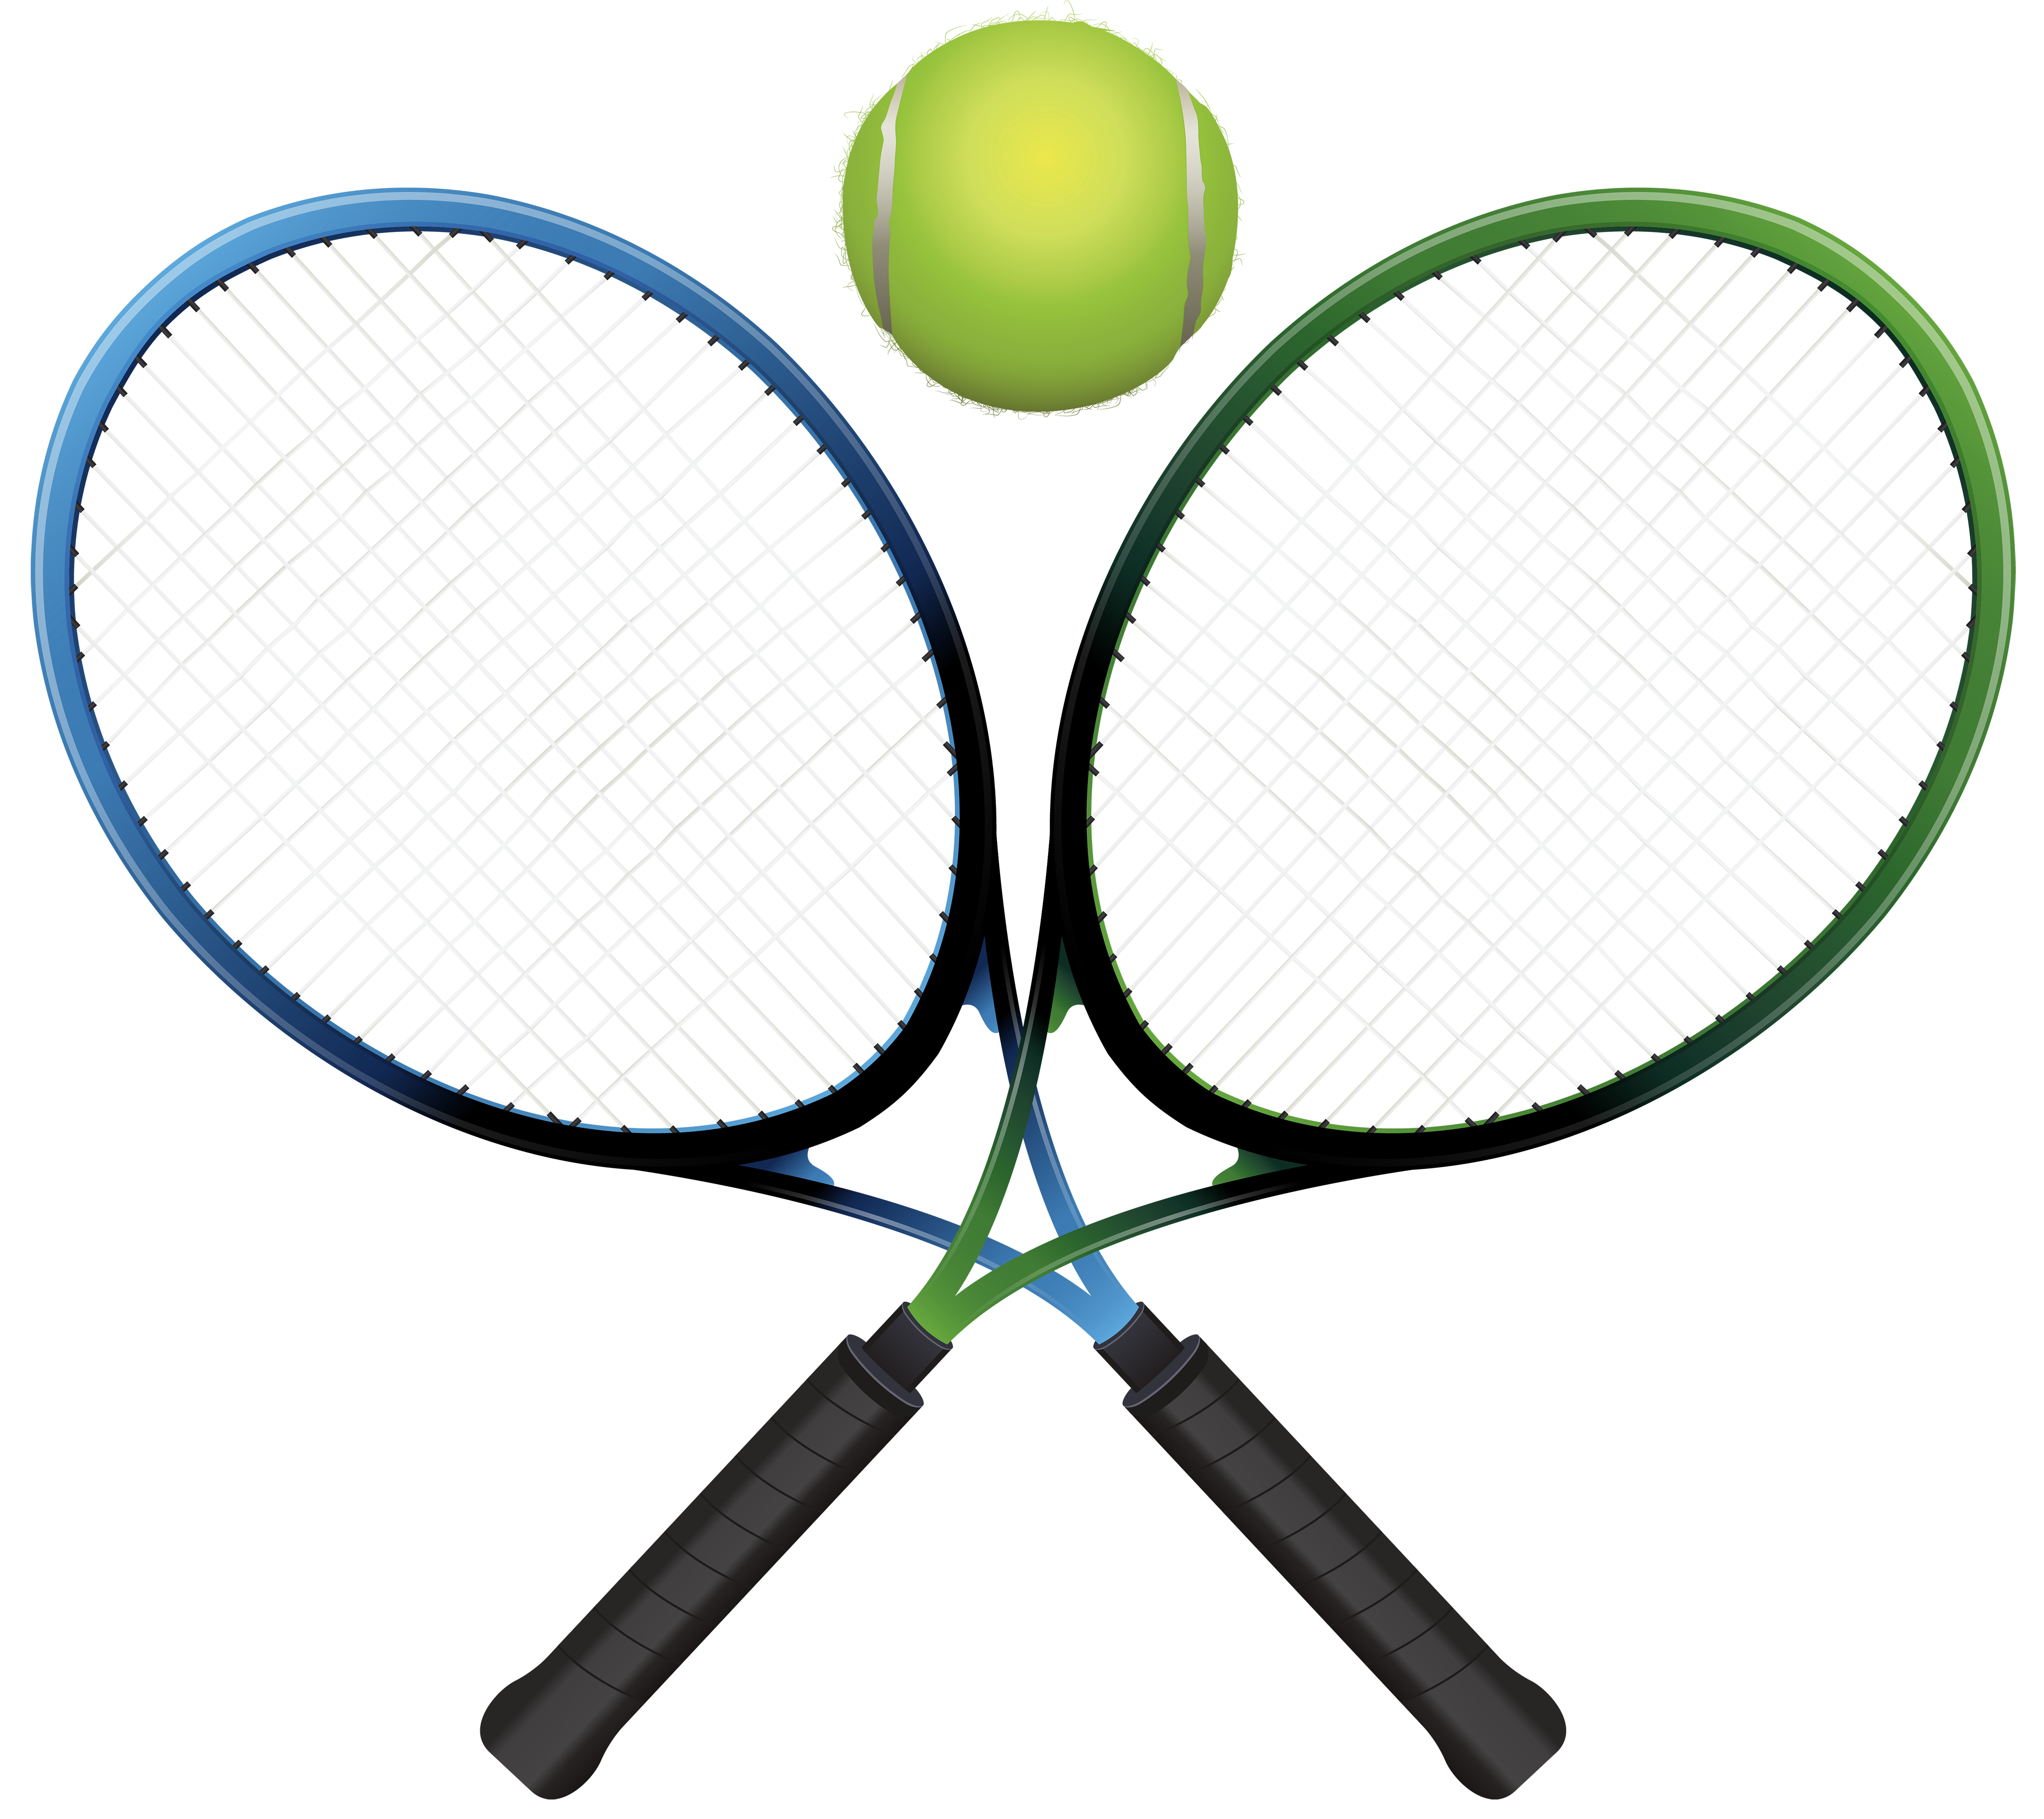 Tennis rackets and.